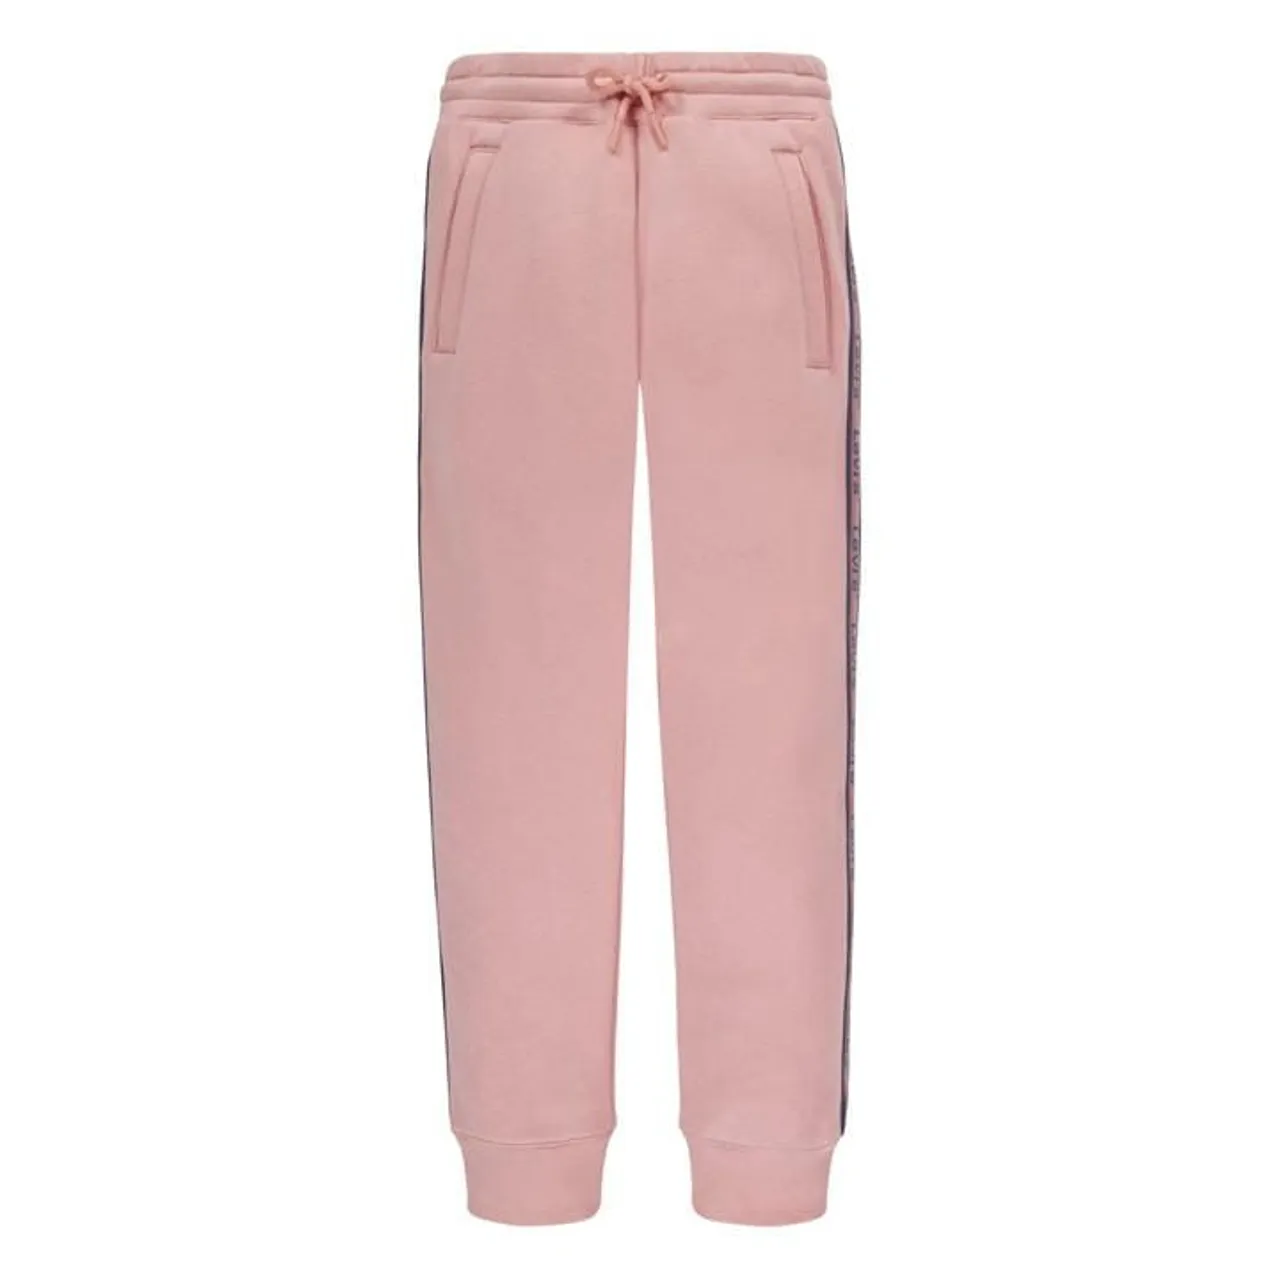 Levis Taped Joggers Junior Girls - Pink